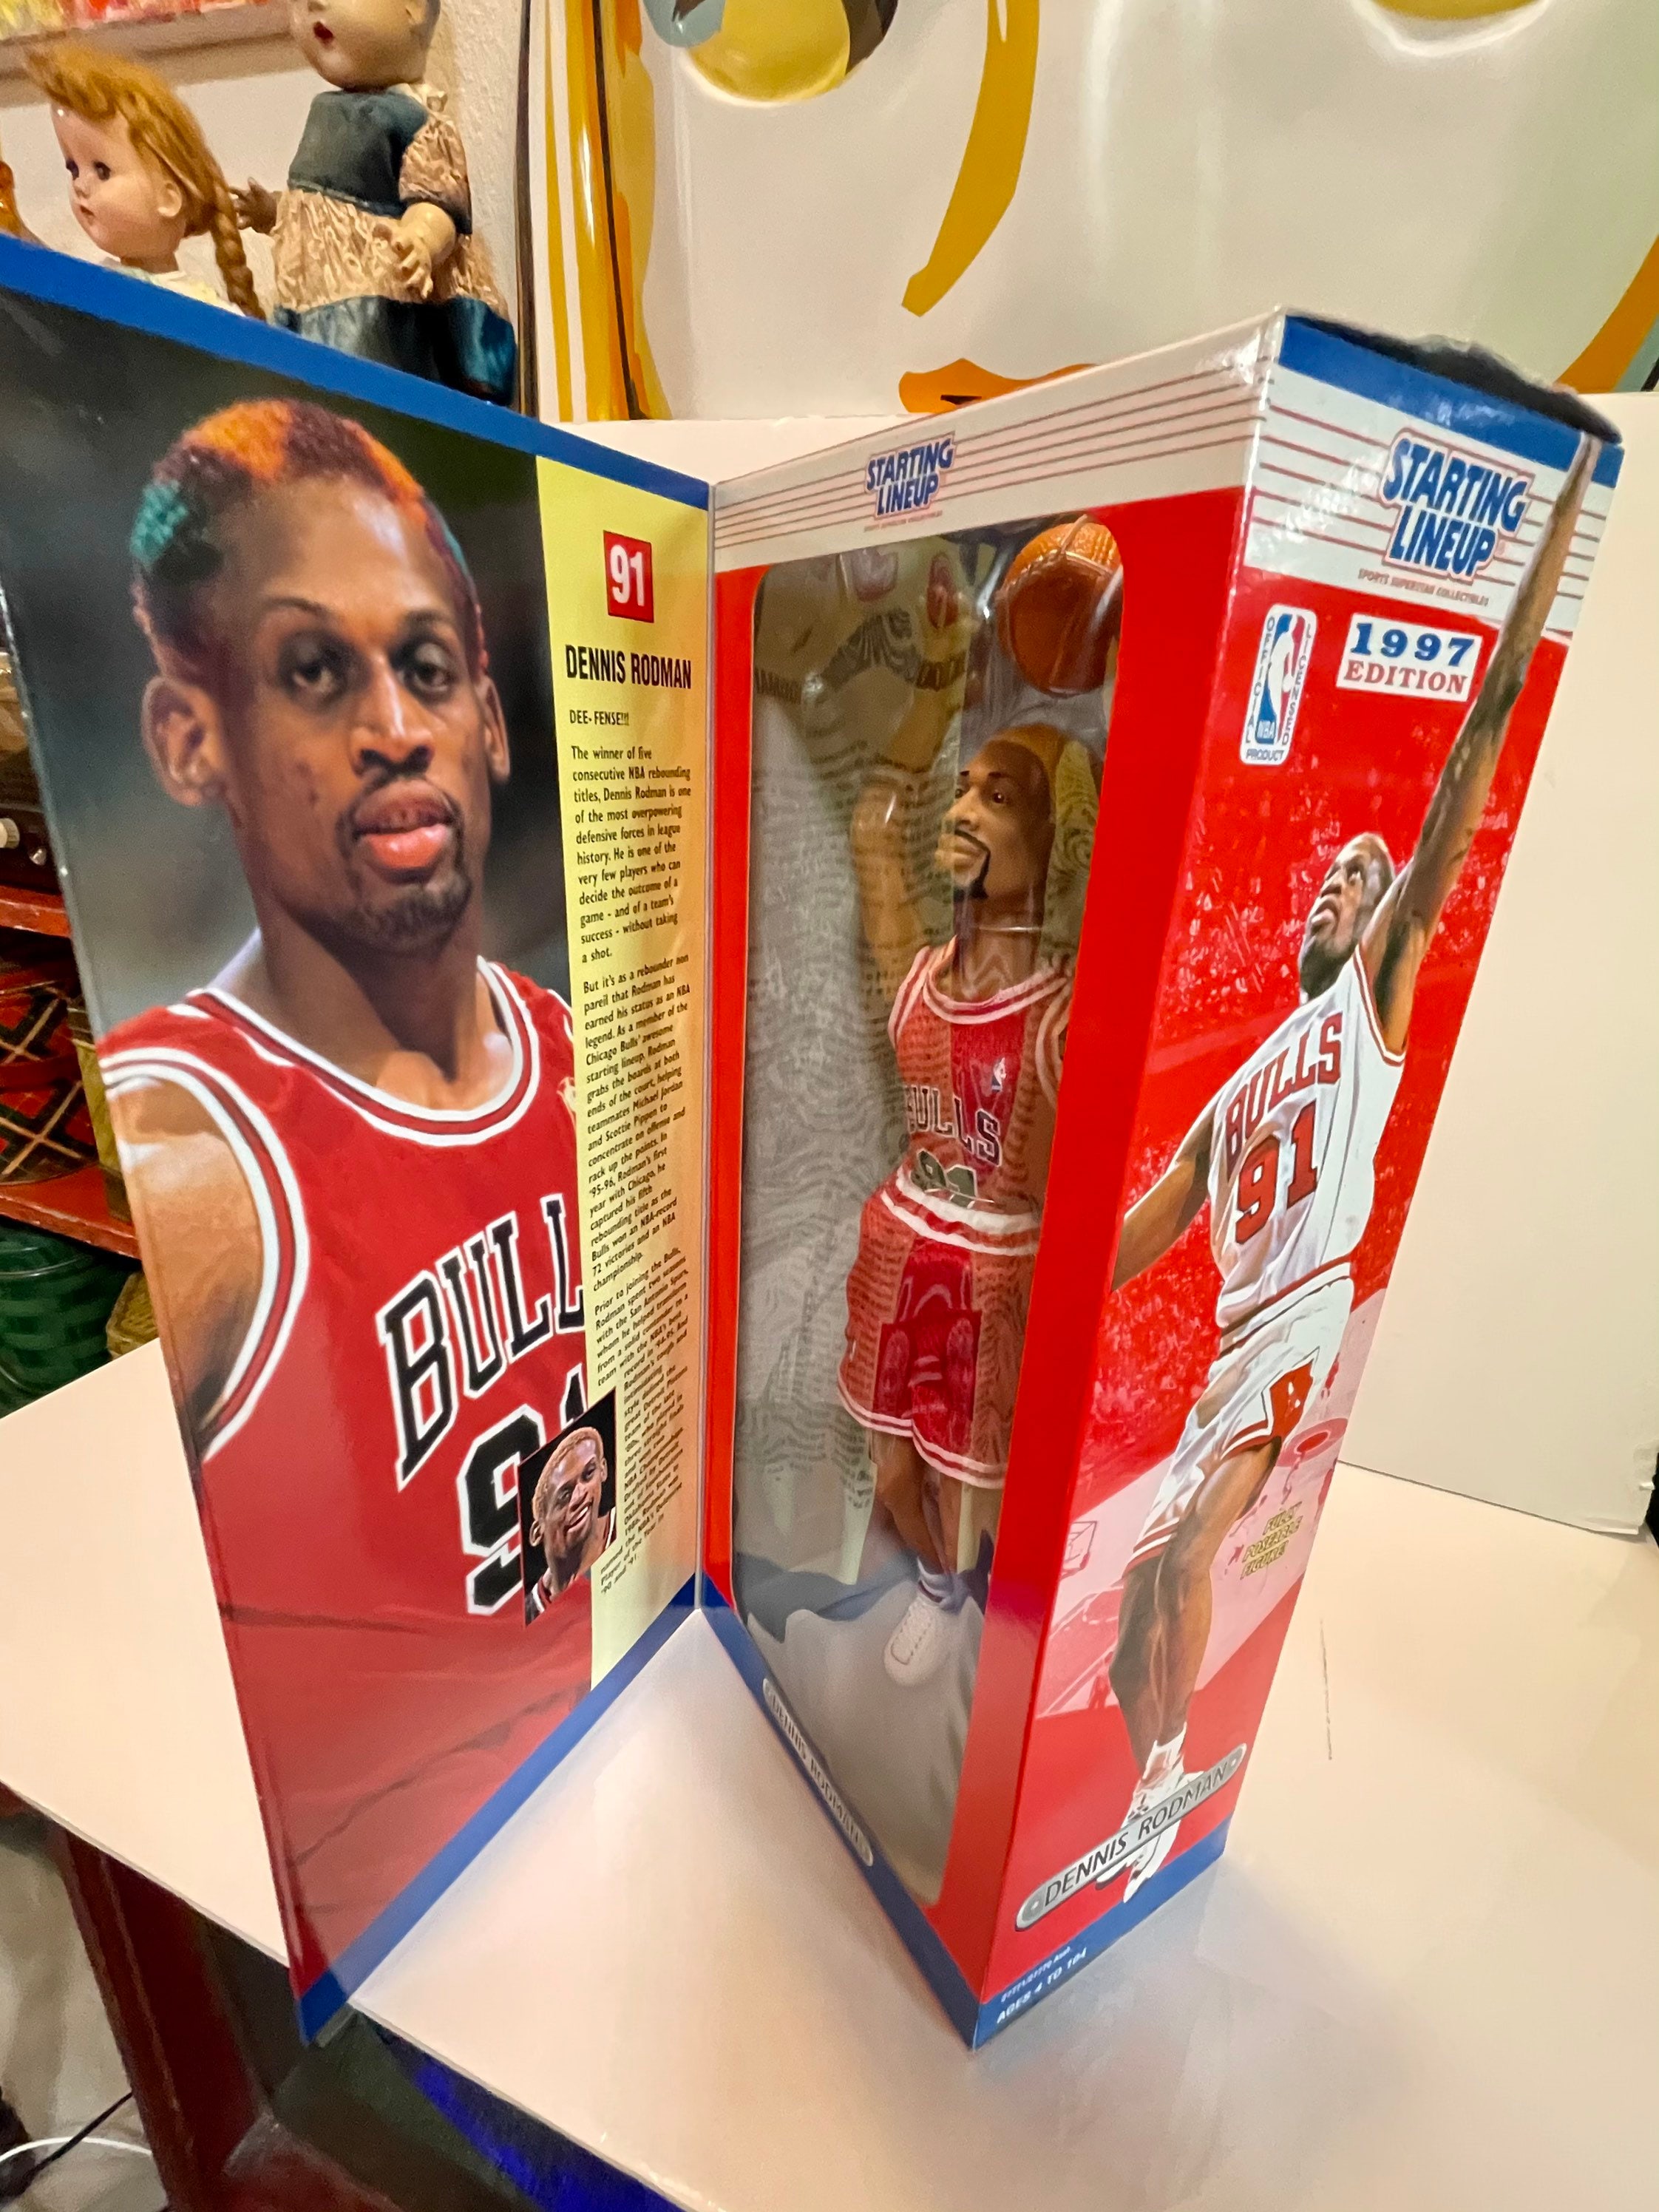 NBA Basketball Player Action Figure OEM Custom Mini Plastic Sports Figures  for Collection - China Basketball Player Figures and Basketball Figures  price